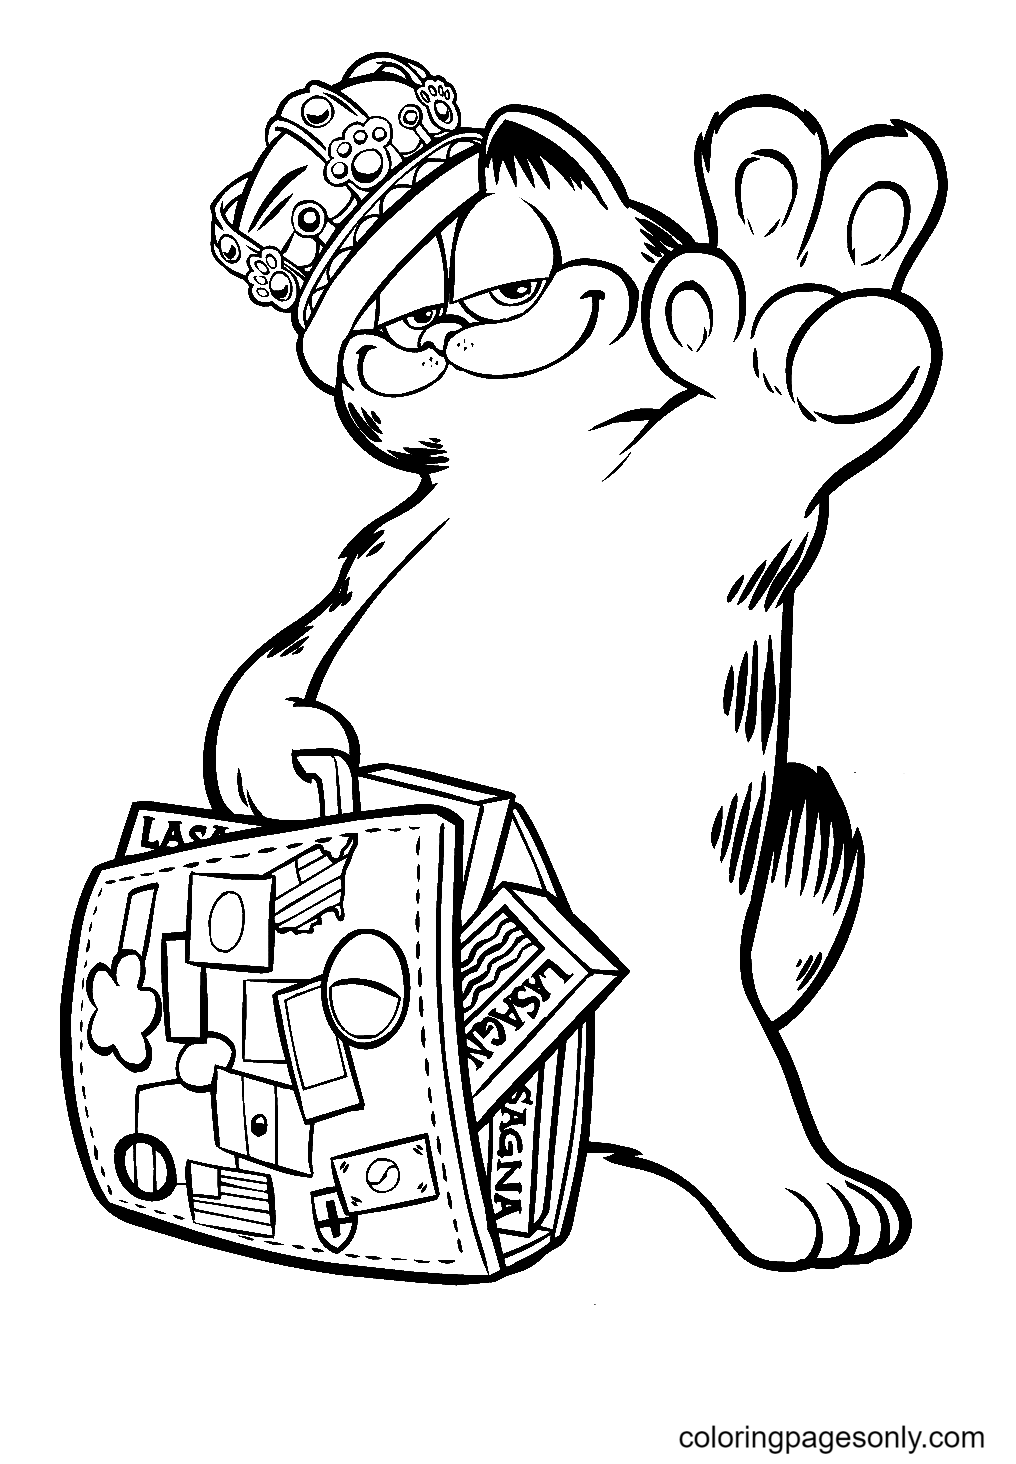 Garfield Traveling Coloring Page